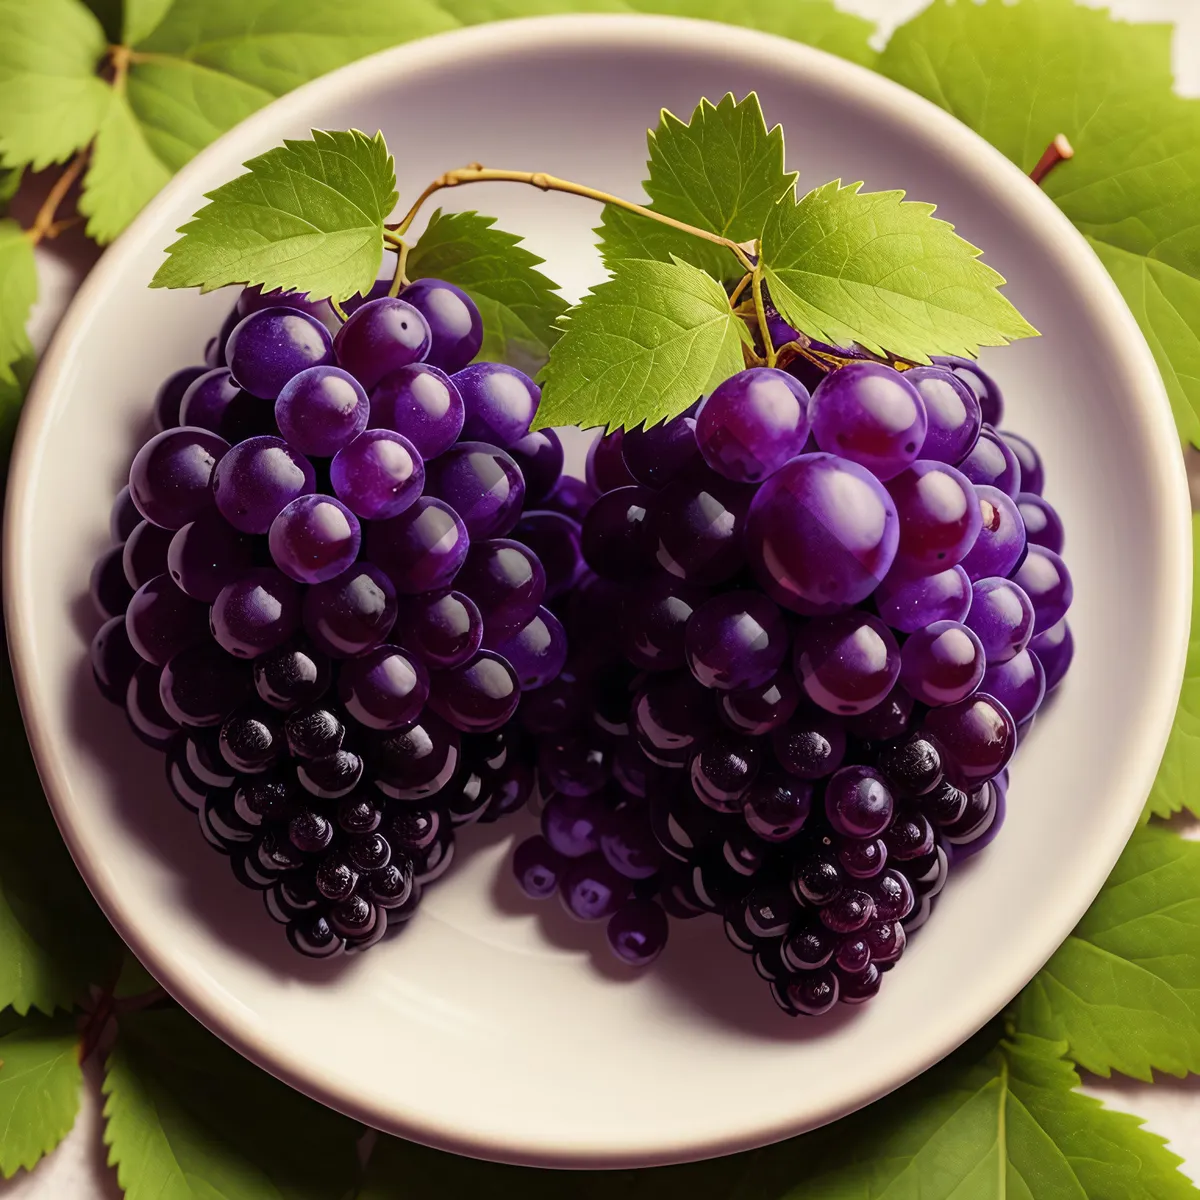 Picture of Deliciously Fresh Blackberry and Grape Summer Medley"
(Note: This text can be used as a short name for an image.)